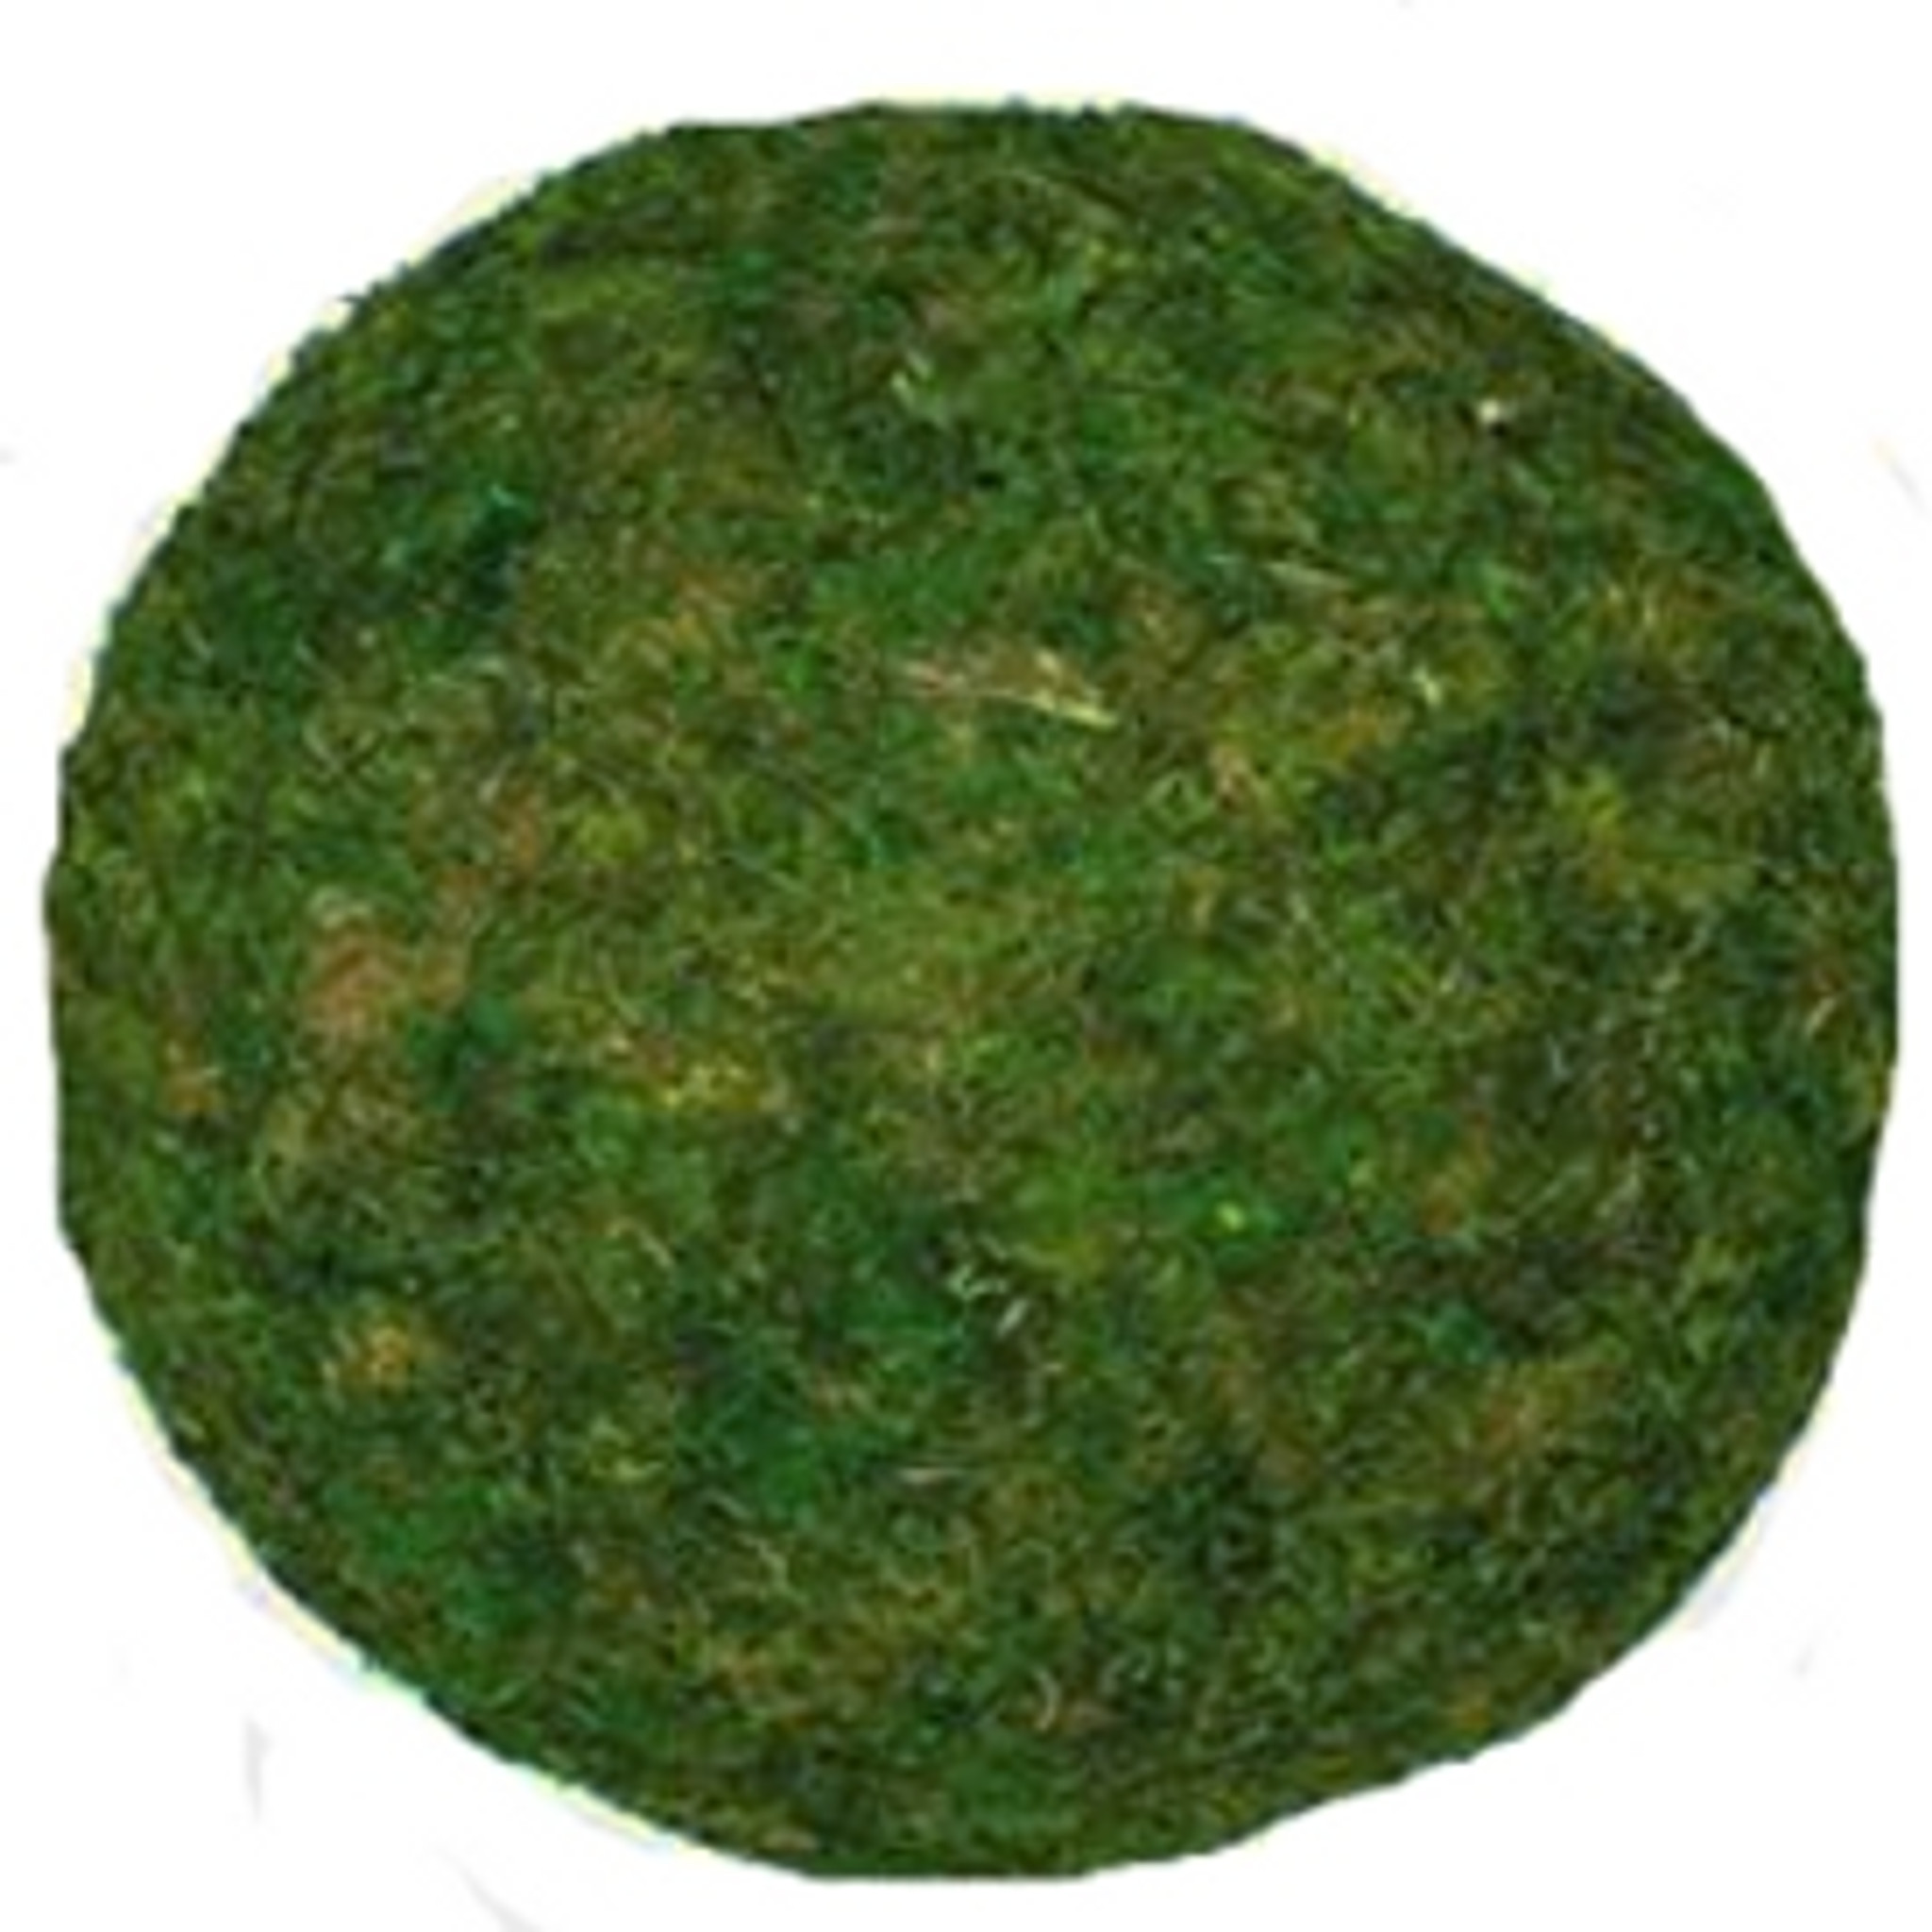 MOSS BALL - GREEN - 12 LARGE - PACKED 2